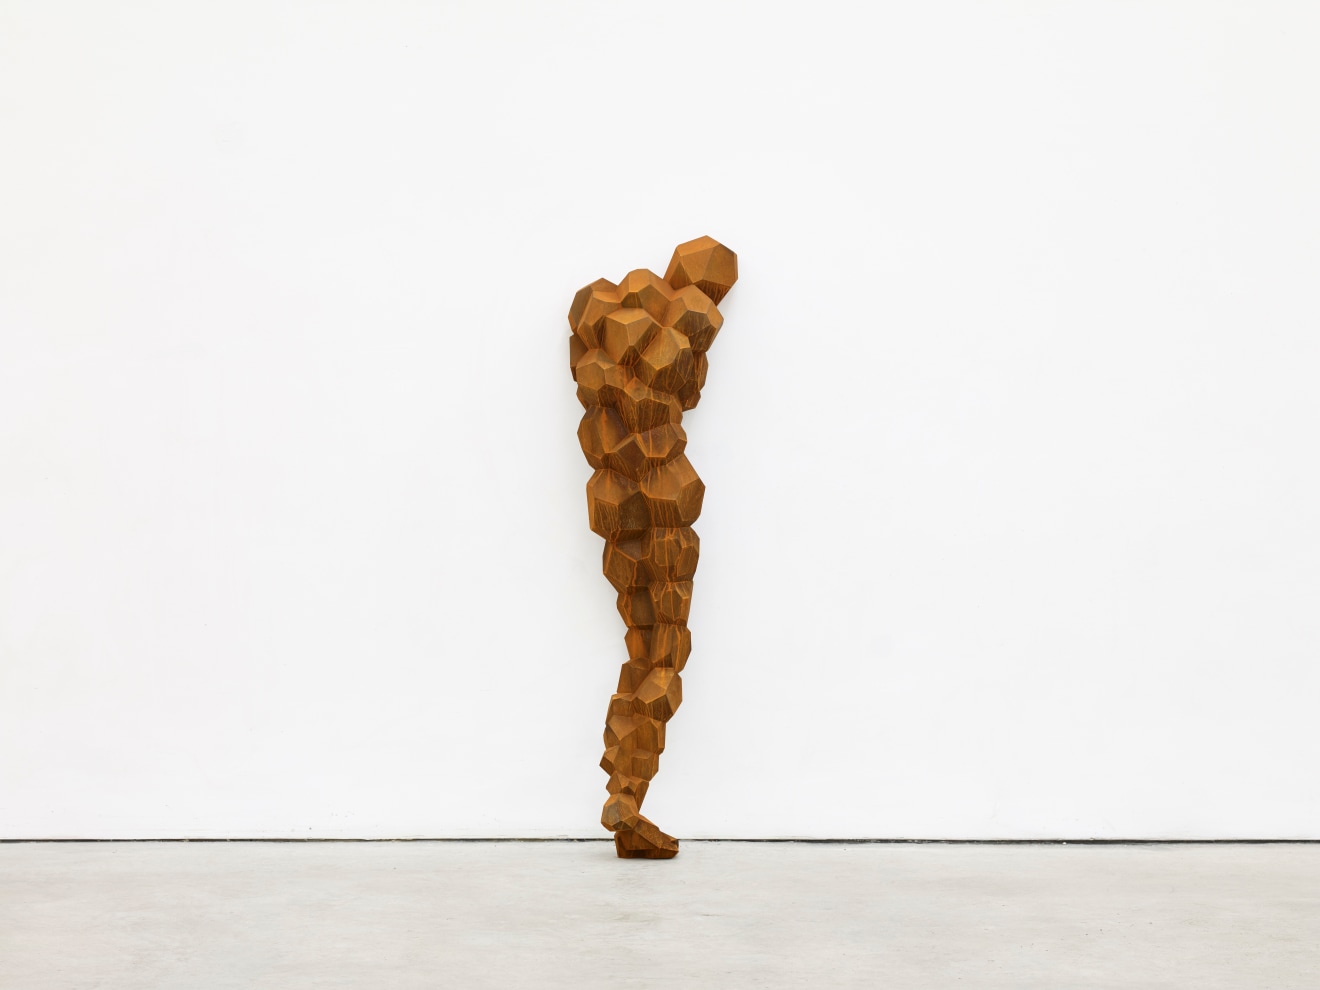 ANTONY GORMLEY, CLEAVE, 2017, cast iron, 68 3/4 x 19 x 16 1/2 inches (174.5 x 48.5 x 42 cm), edition of 5 with 1 AP, AG-3707